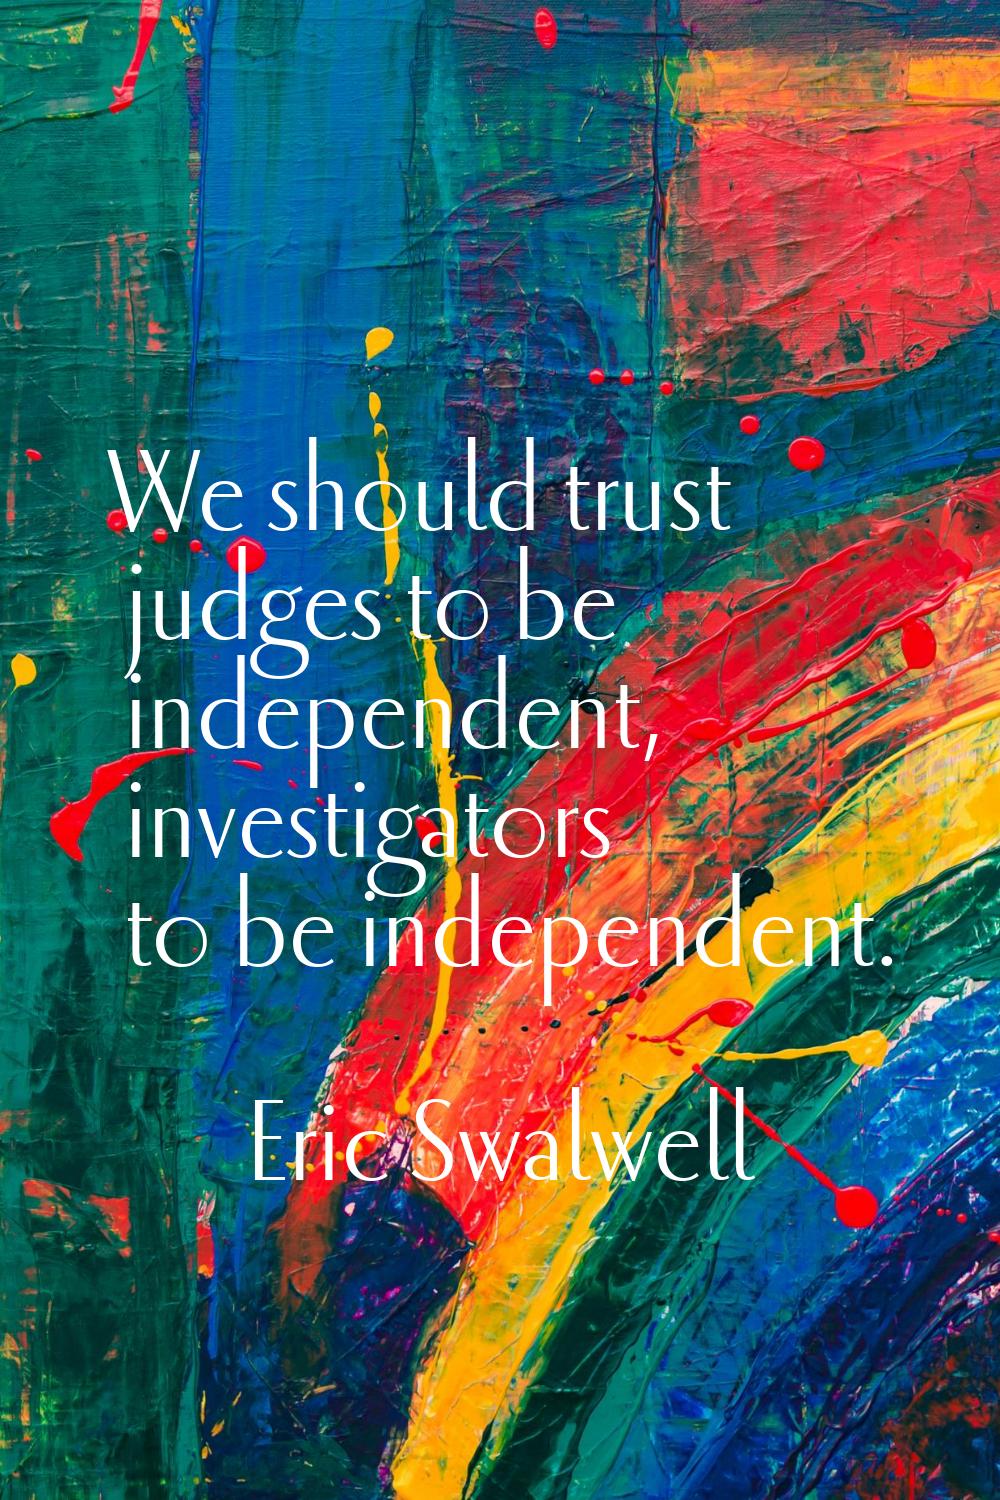 We should trust judges to be independent, investigators to be independent.